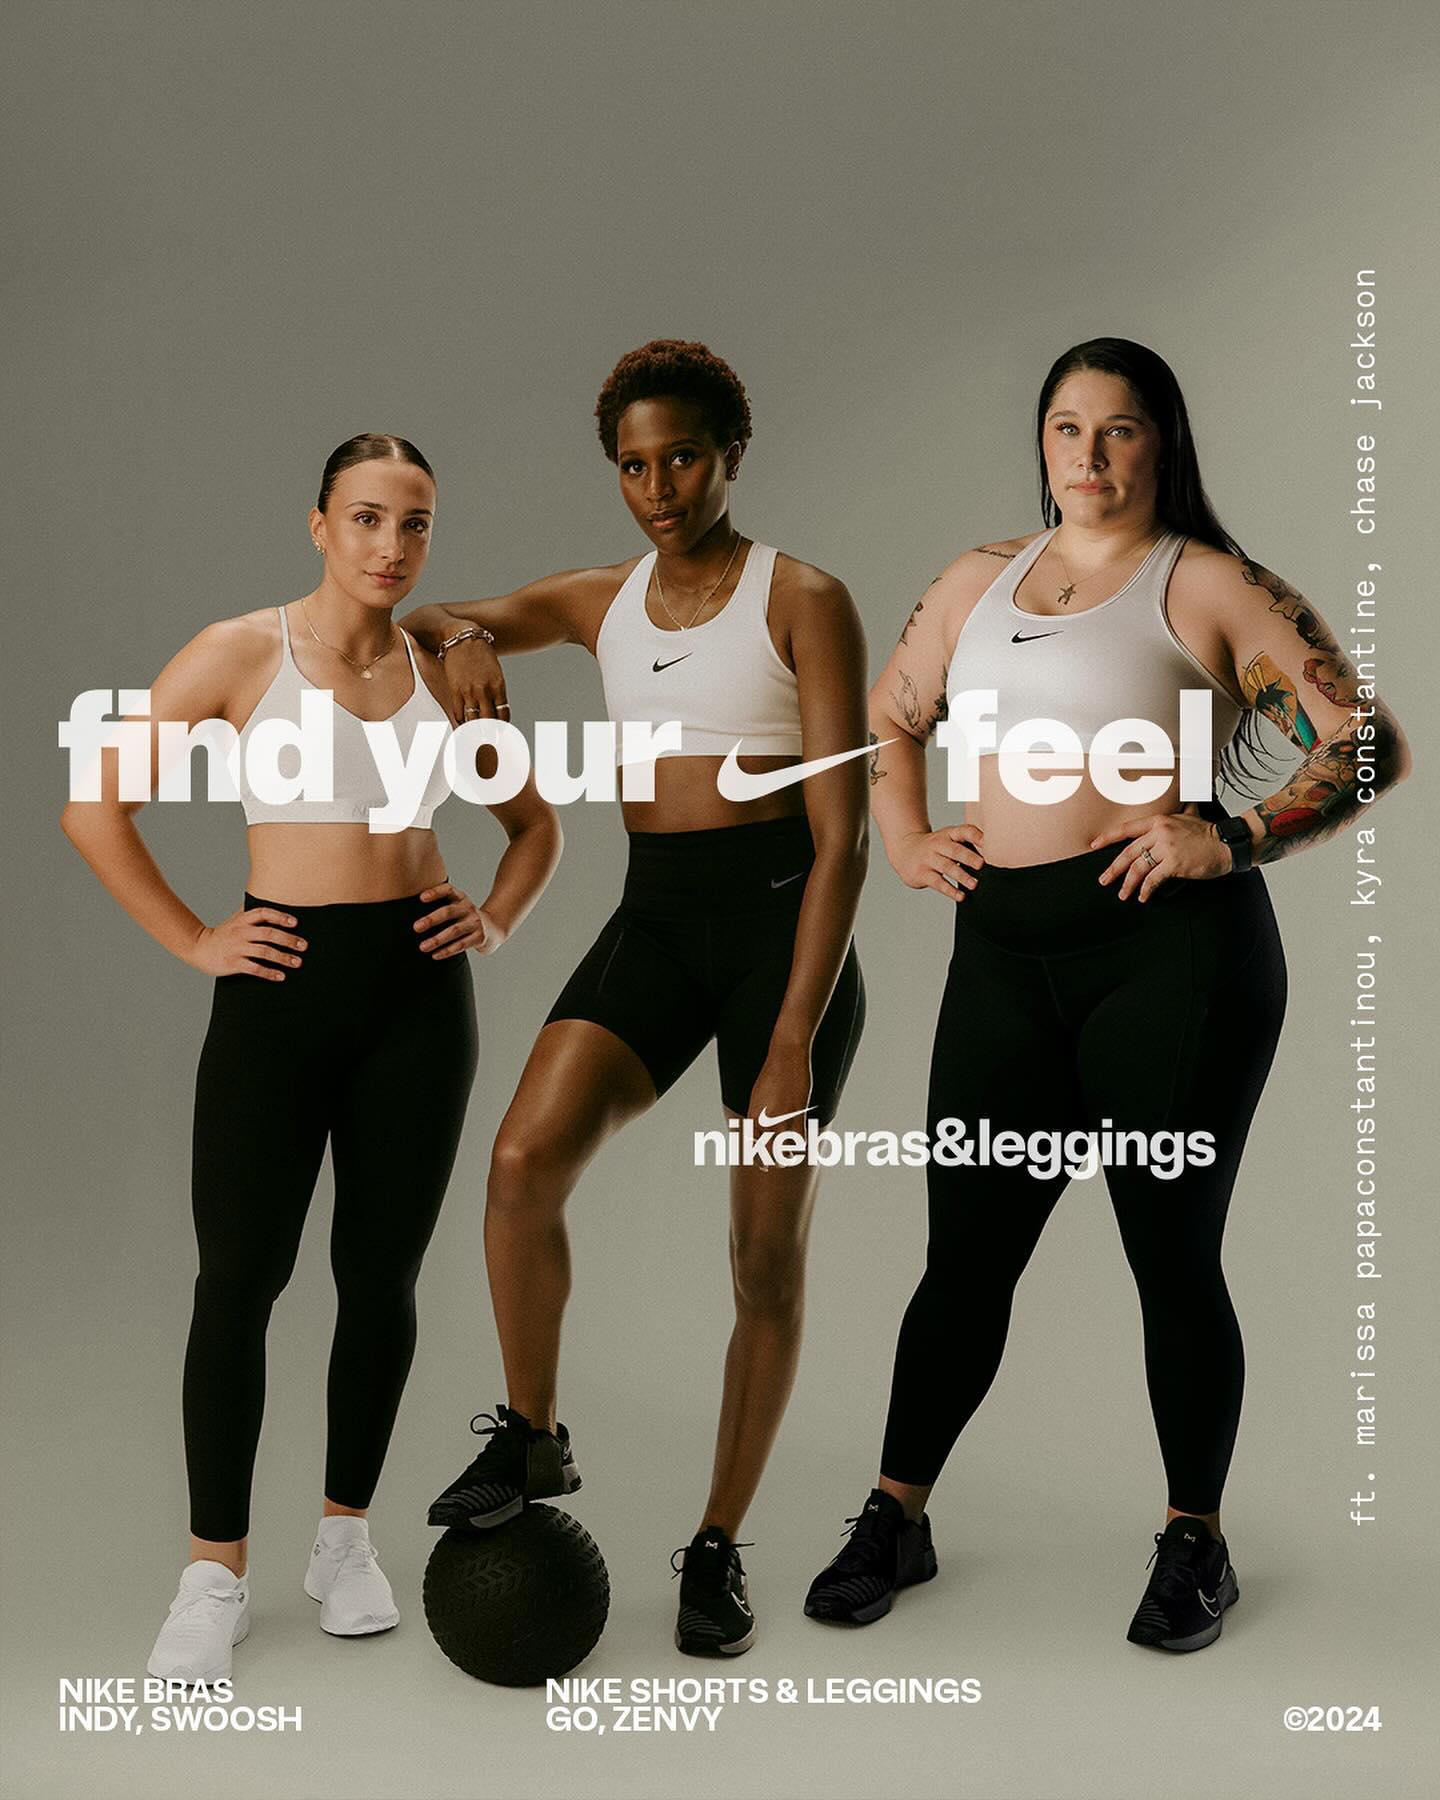 Join Nike and Sport Chek for an exclusive Women’s Shopping Experience featuring the Find Your Feel campaign. Explore statement bras, leggings, and more for your workout; yorkdale